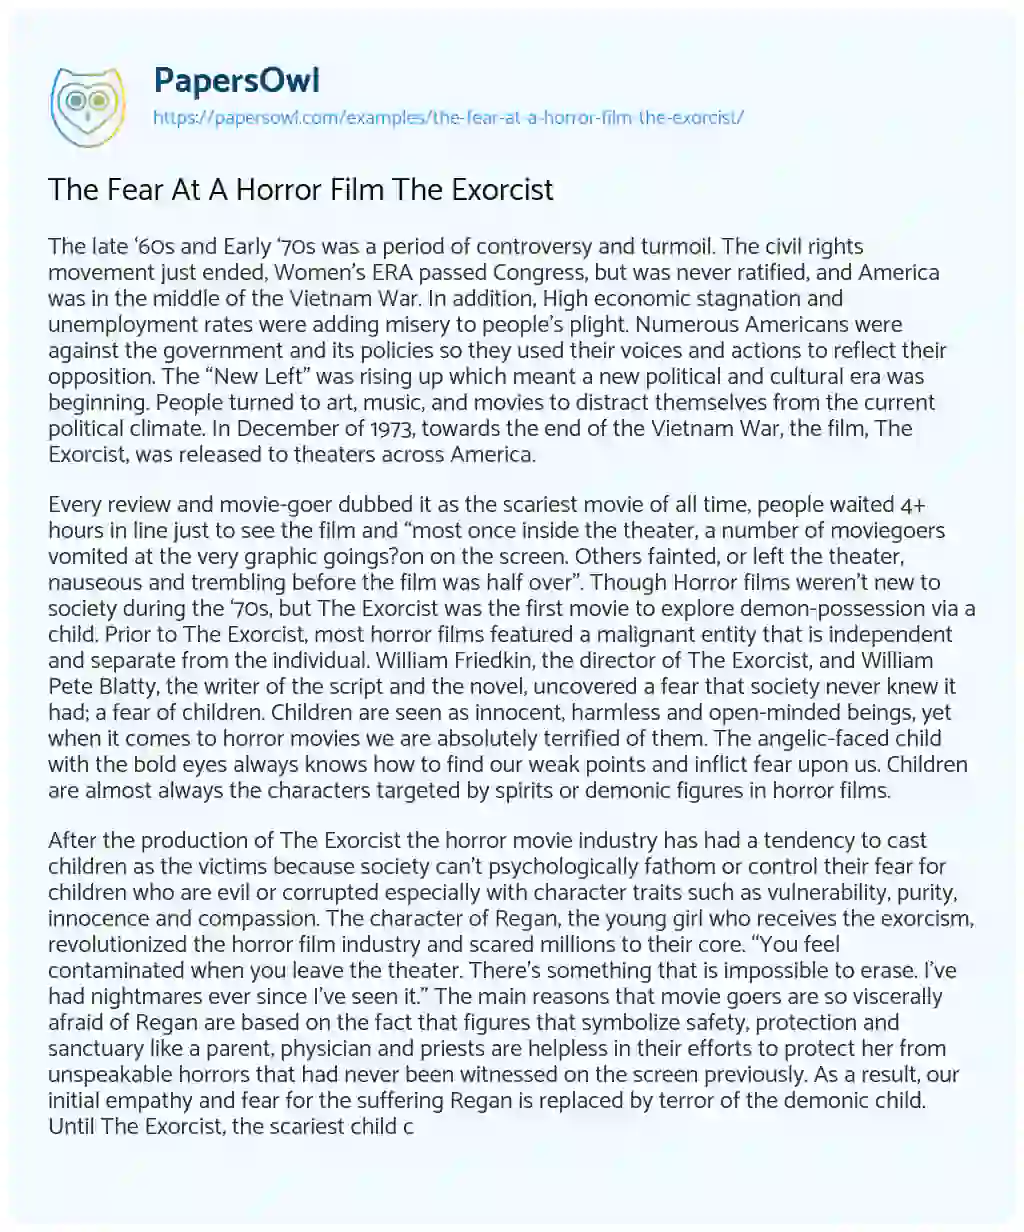 Essay on The Fear at a Horror Film the Exorcist